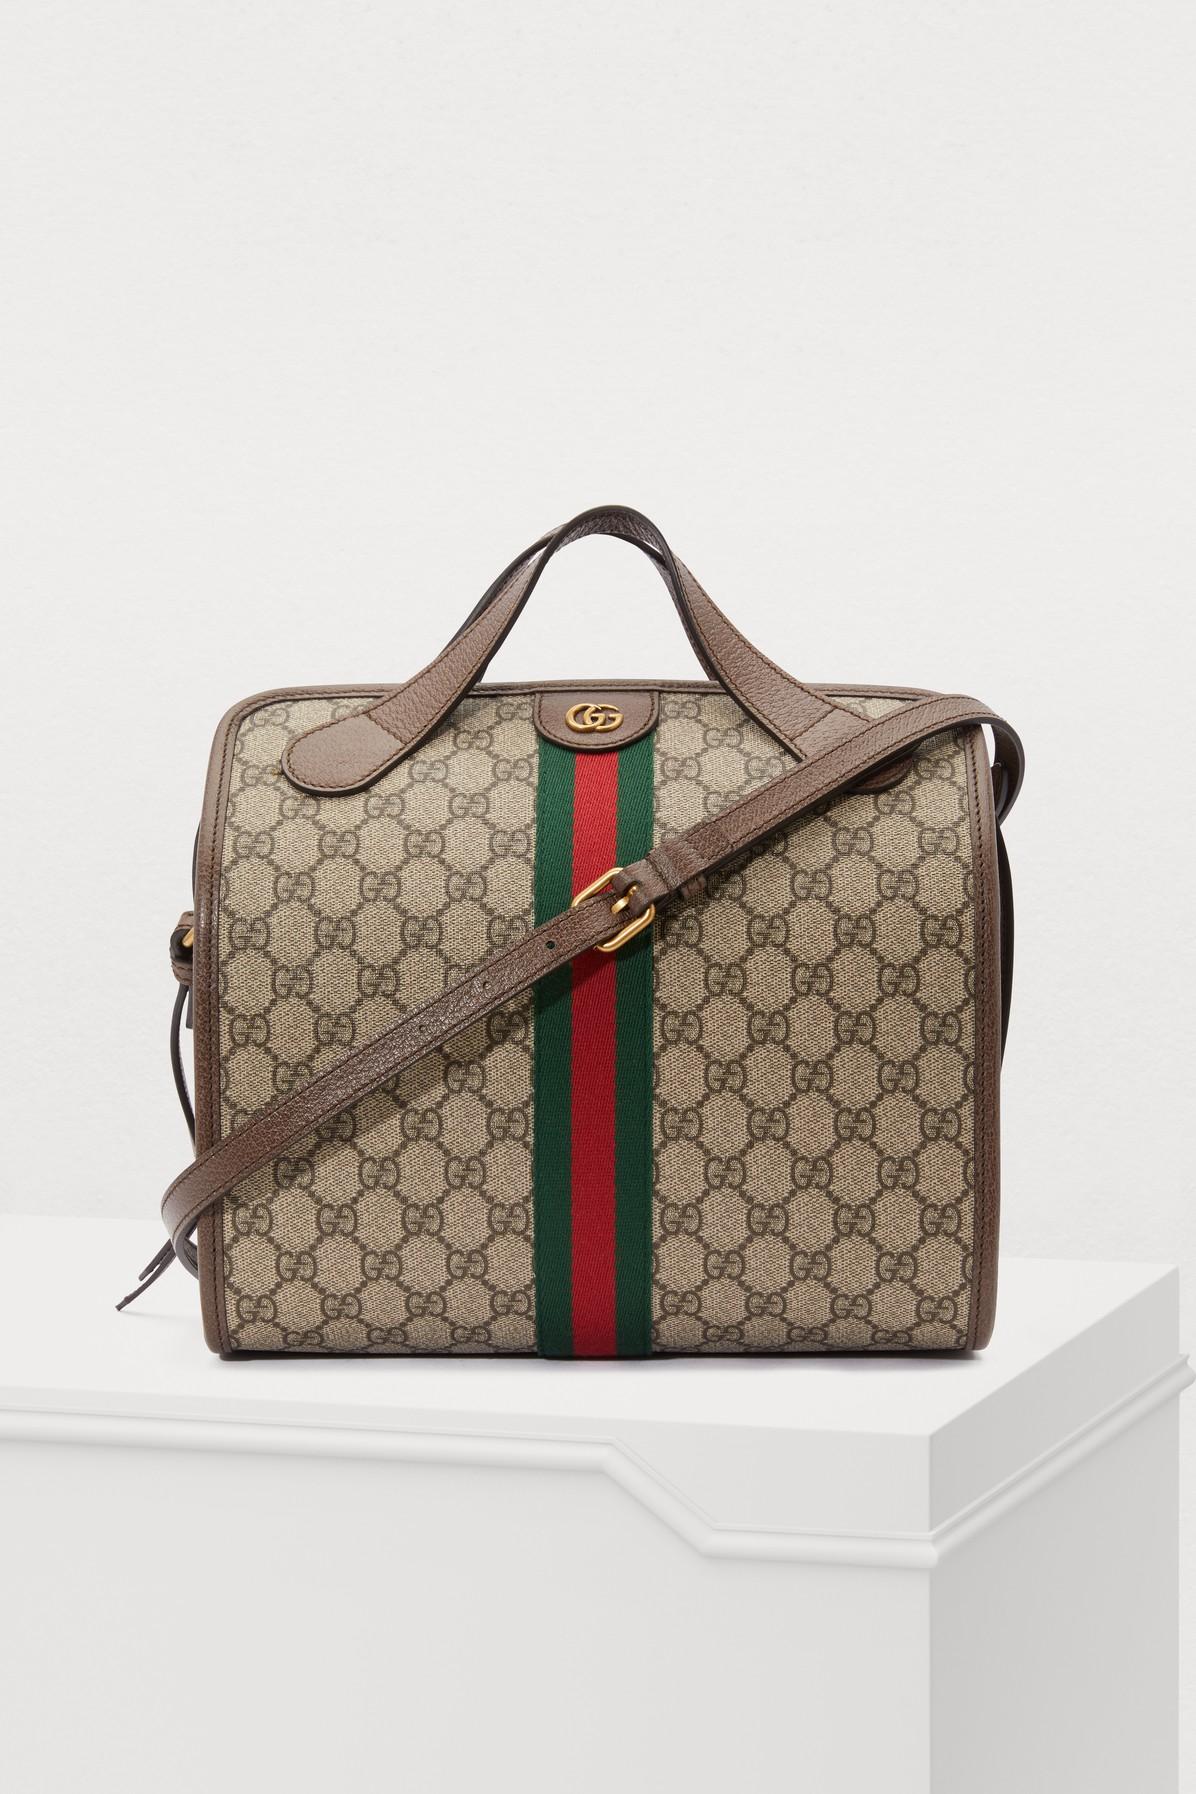 Gucci GG Supreme Duffle Bag in Natural - Lyst